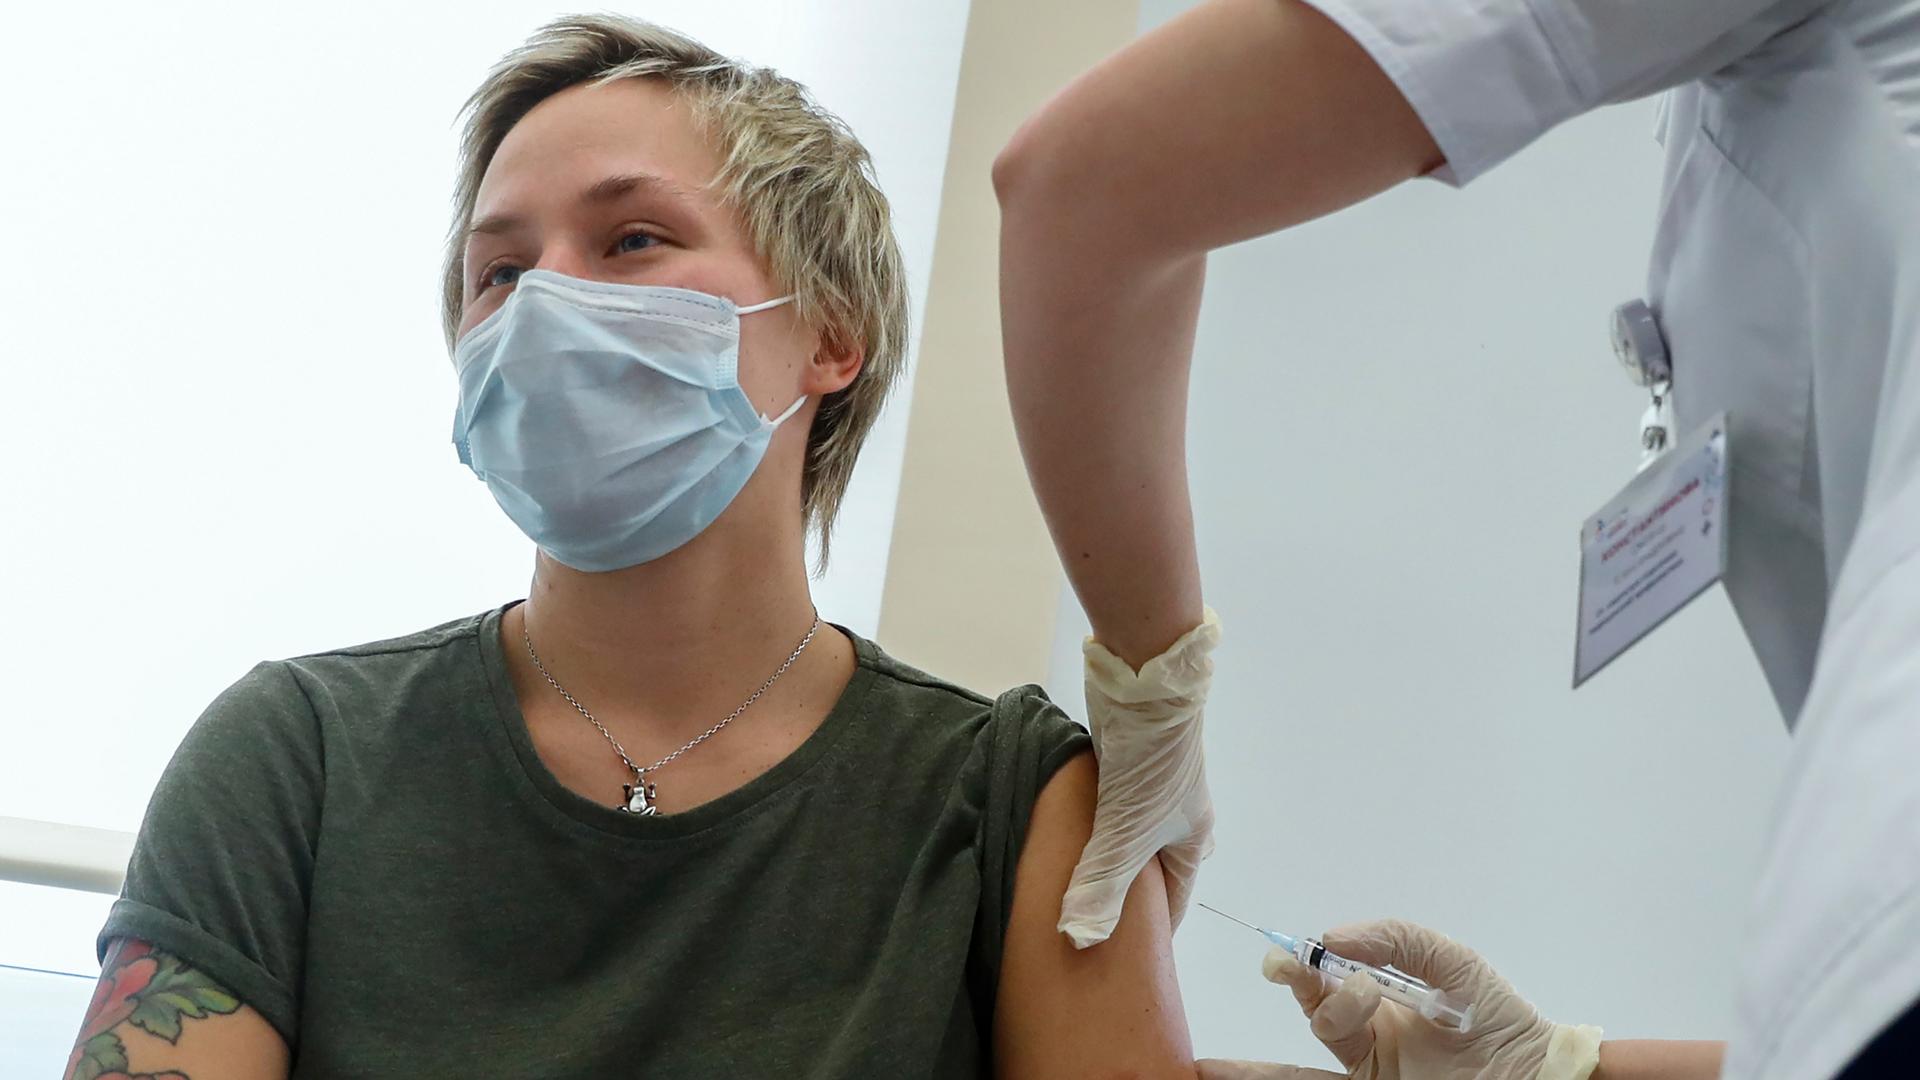 A person is shown with their shirt sleeve rolled up and receiving an injection in their shoulder by a medical professional.